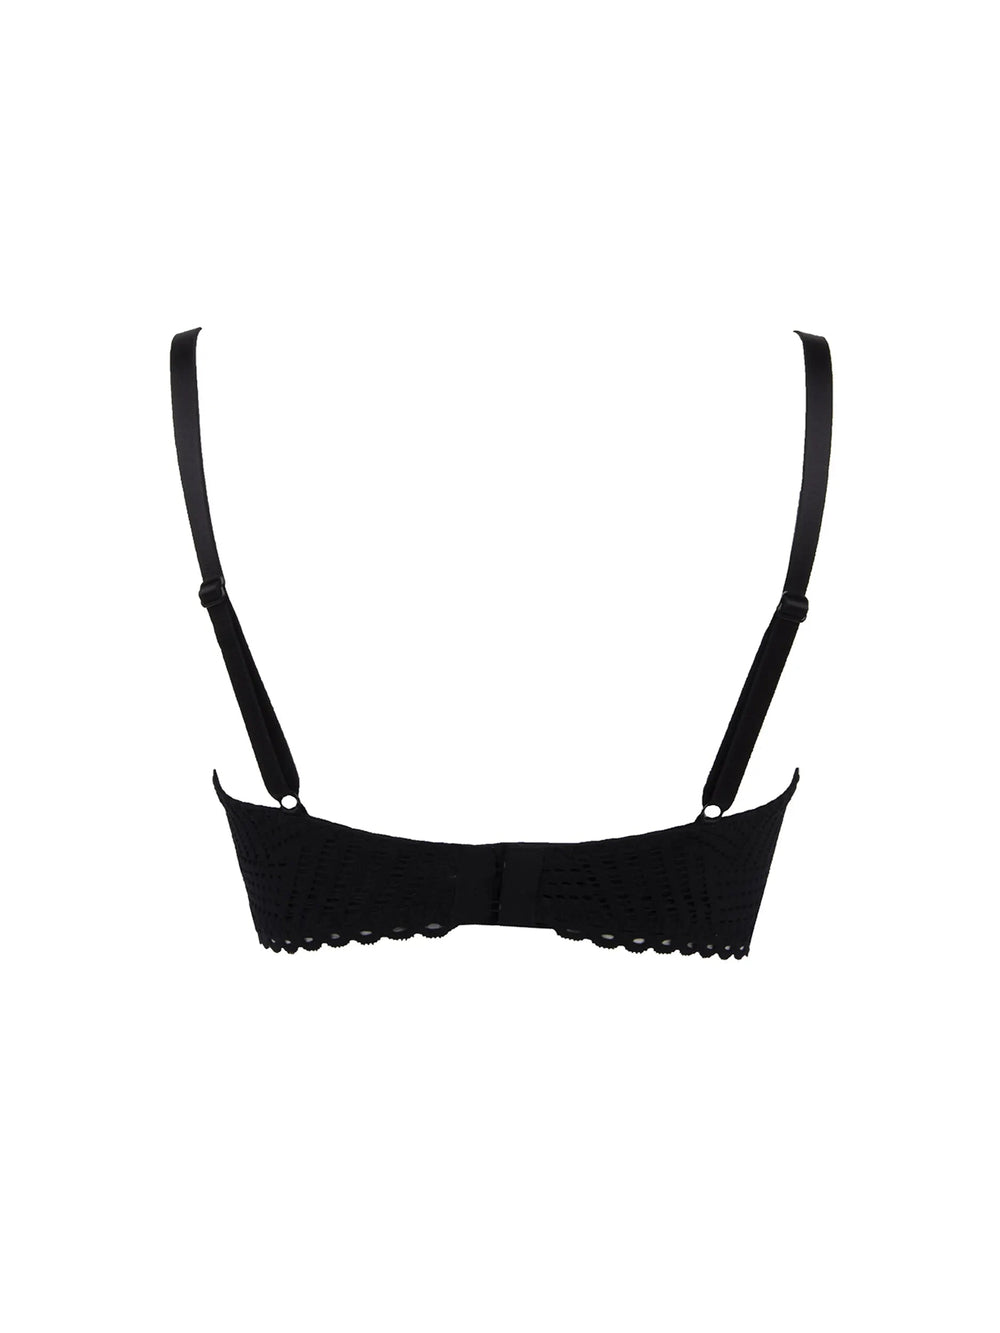 Antigel By Lise Charmel Tressage Graphic Contour - Tressage Noir Contour Bra Antigel by Lise Charmel